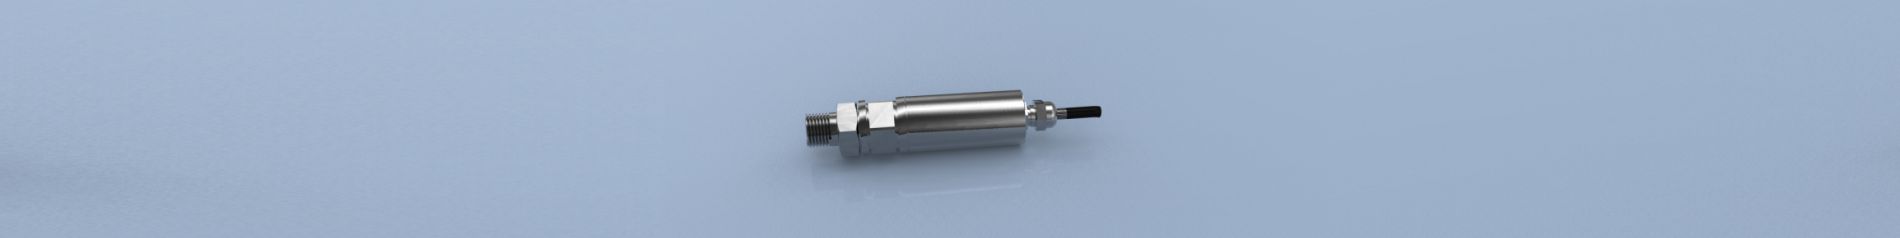 Extemely Reliable Pressure Transducers